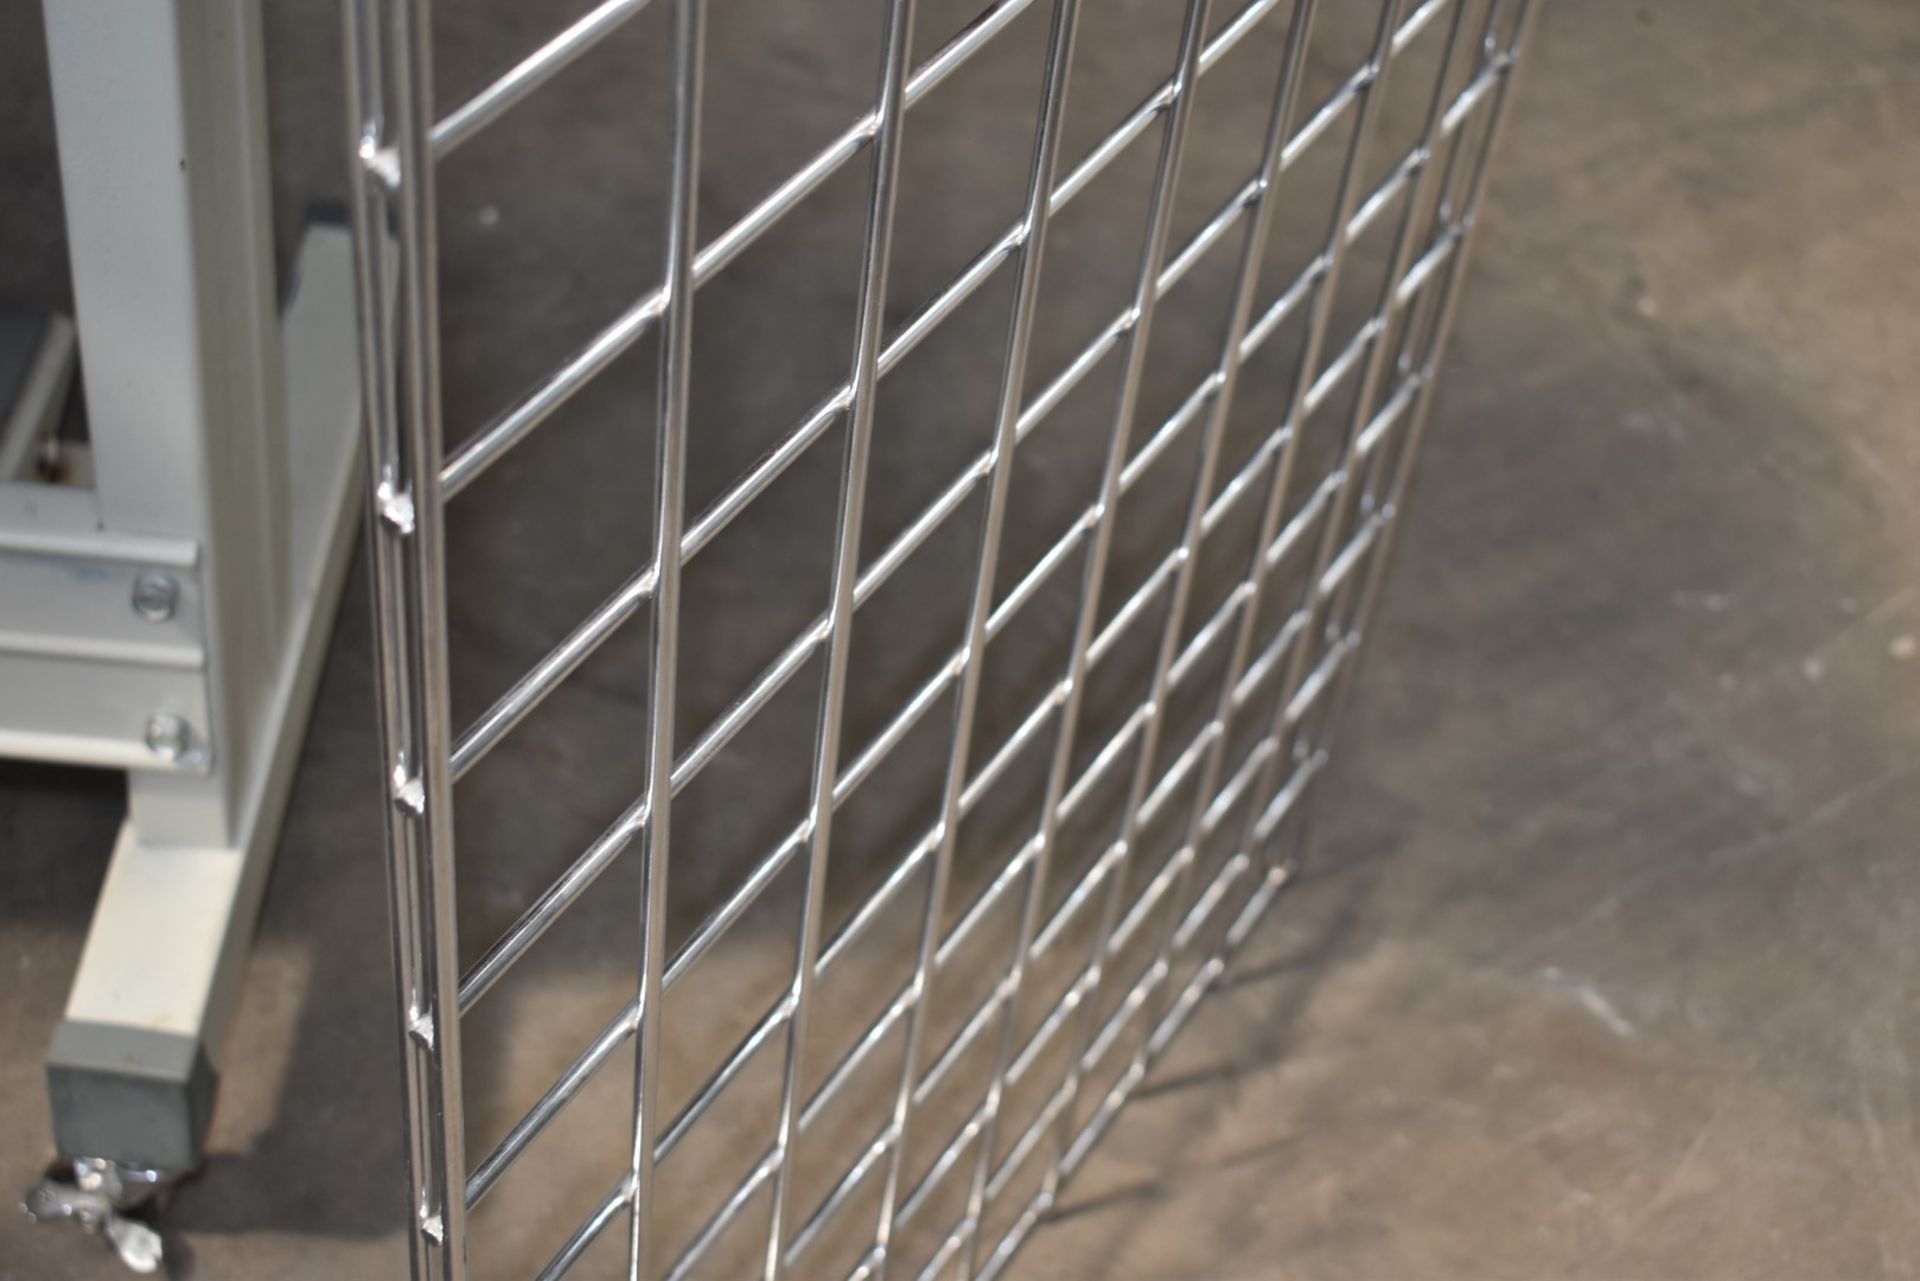 6 x Gridwall Mesh Wall Panels - Heavy Metal Construction in Chrome - Ideal For Retail Wall Displays! - Image 8 of 8